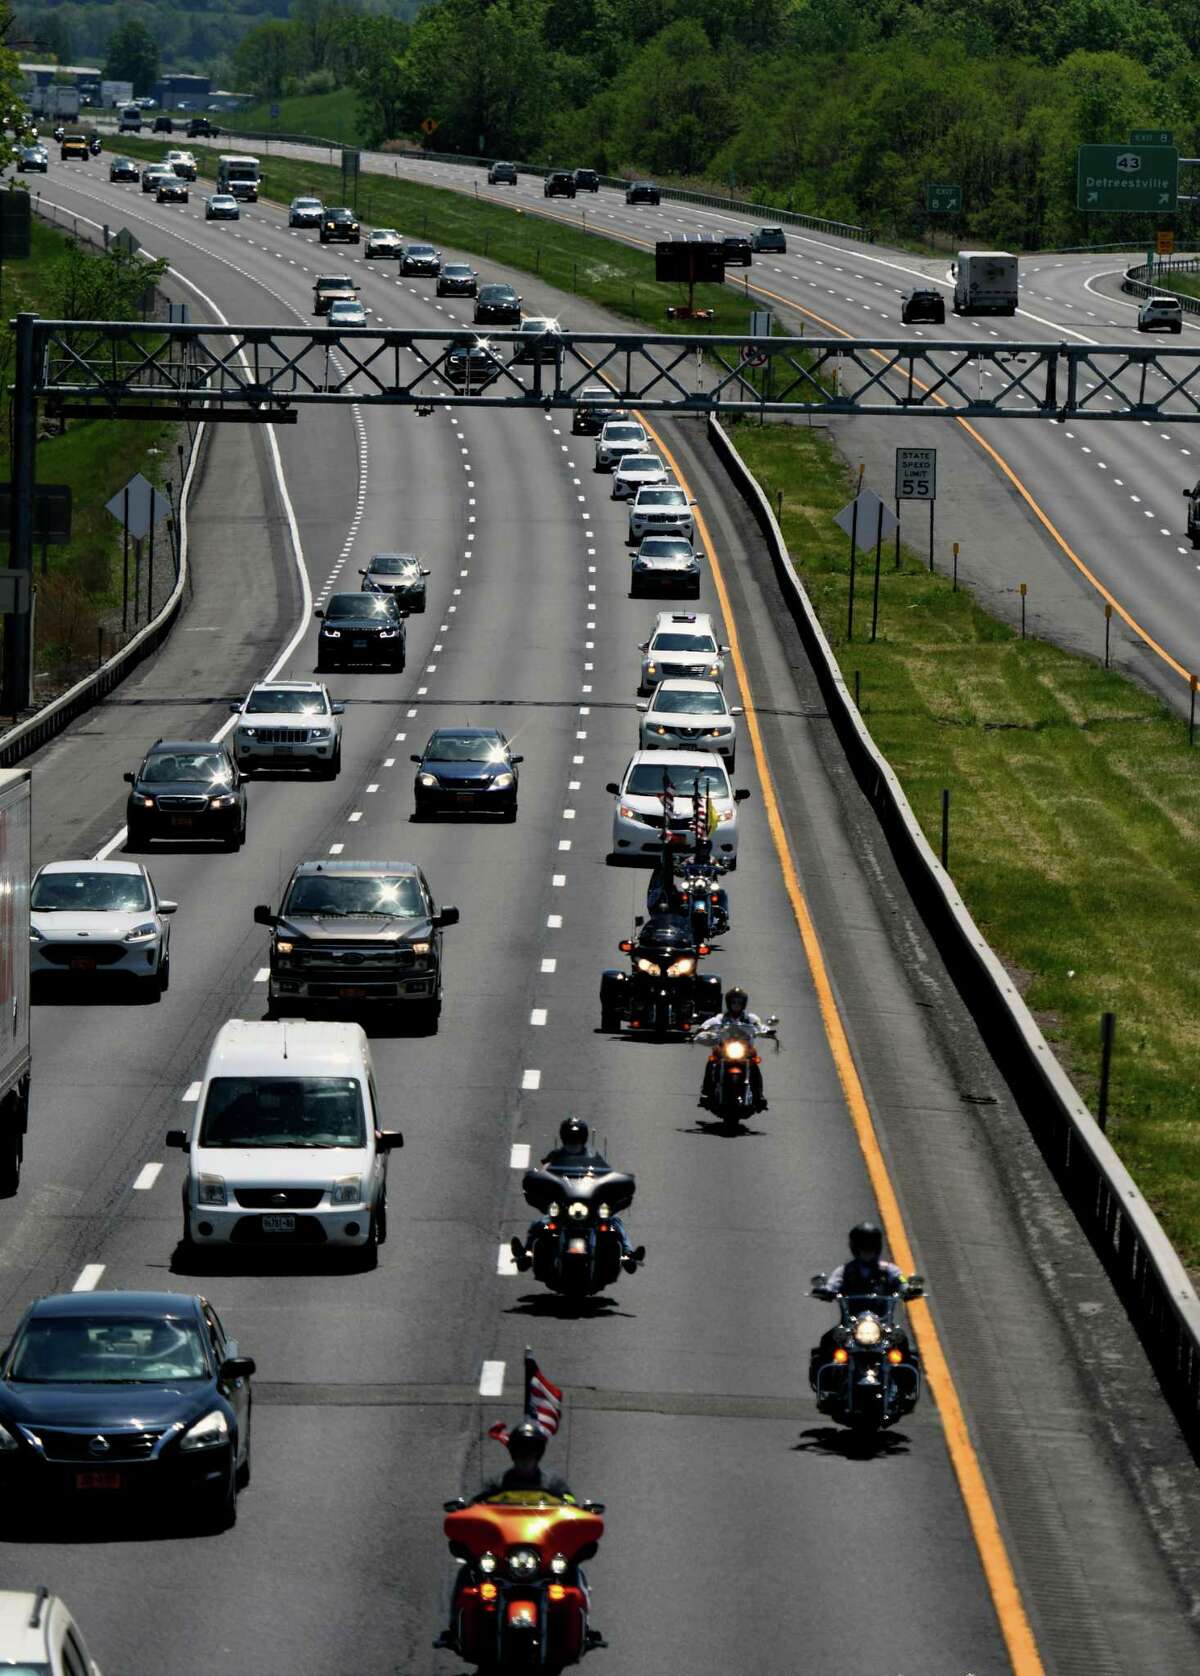 A funeral procession for Korean War veteran Army Cpl. Clifford S. Johnson of Valatie heads West on I-90 below Washington Avenue on Thursday, May 20, 2021, in Rensselaer, N.Y. Johnson was a member of Headquarters Battery, 57th Field Artillery Battalion, 7th Infantry Division. He was reported missing in action Dec. 6, 1950, when his unit was attacked by enemy forces near the Chosin Reservoir, North Korea. Following the battle, his remains could not be recovered. He was just 20 years old. He was accounted for by the Defense POW/MIA Accounting Agency on April 16, 2020, after his remains were identified using circumstantial and material evidence and mitochondrial and autosomal DNA analysis.(Will Waldron/Times Union)